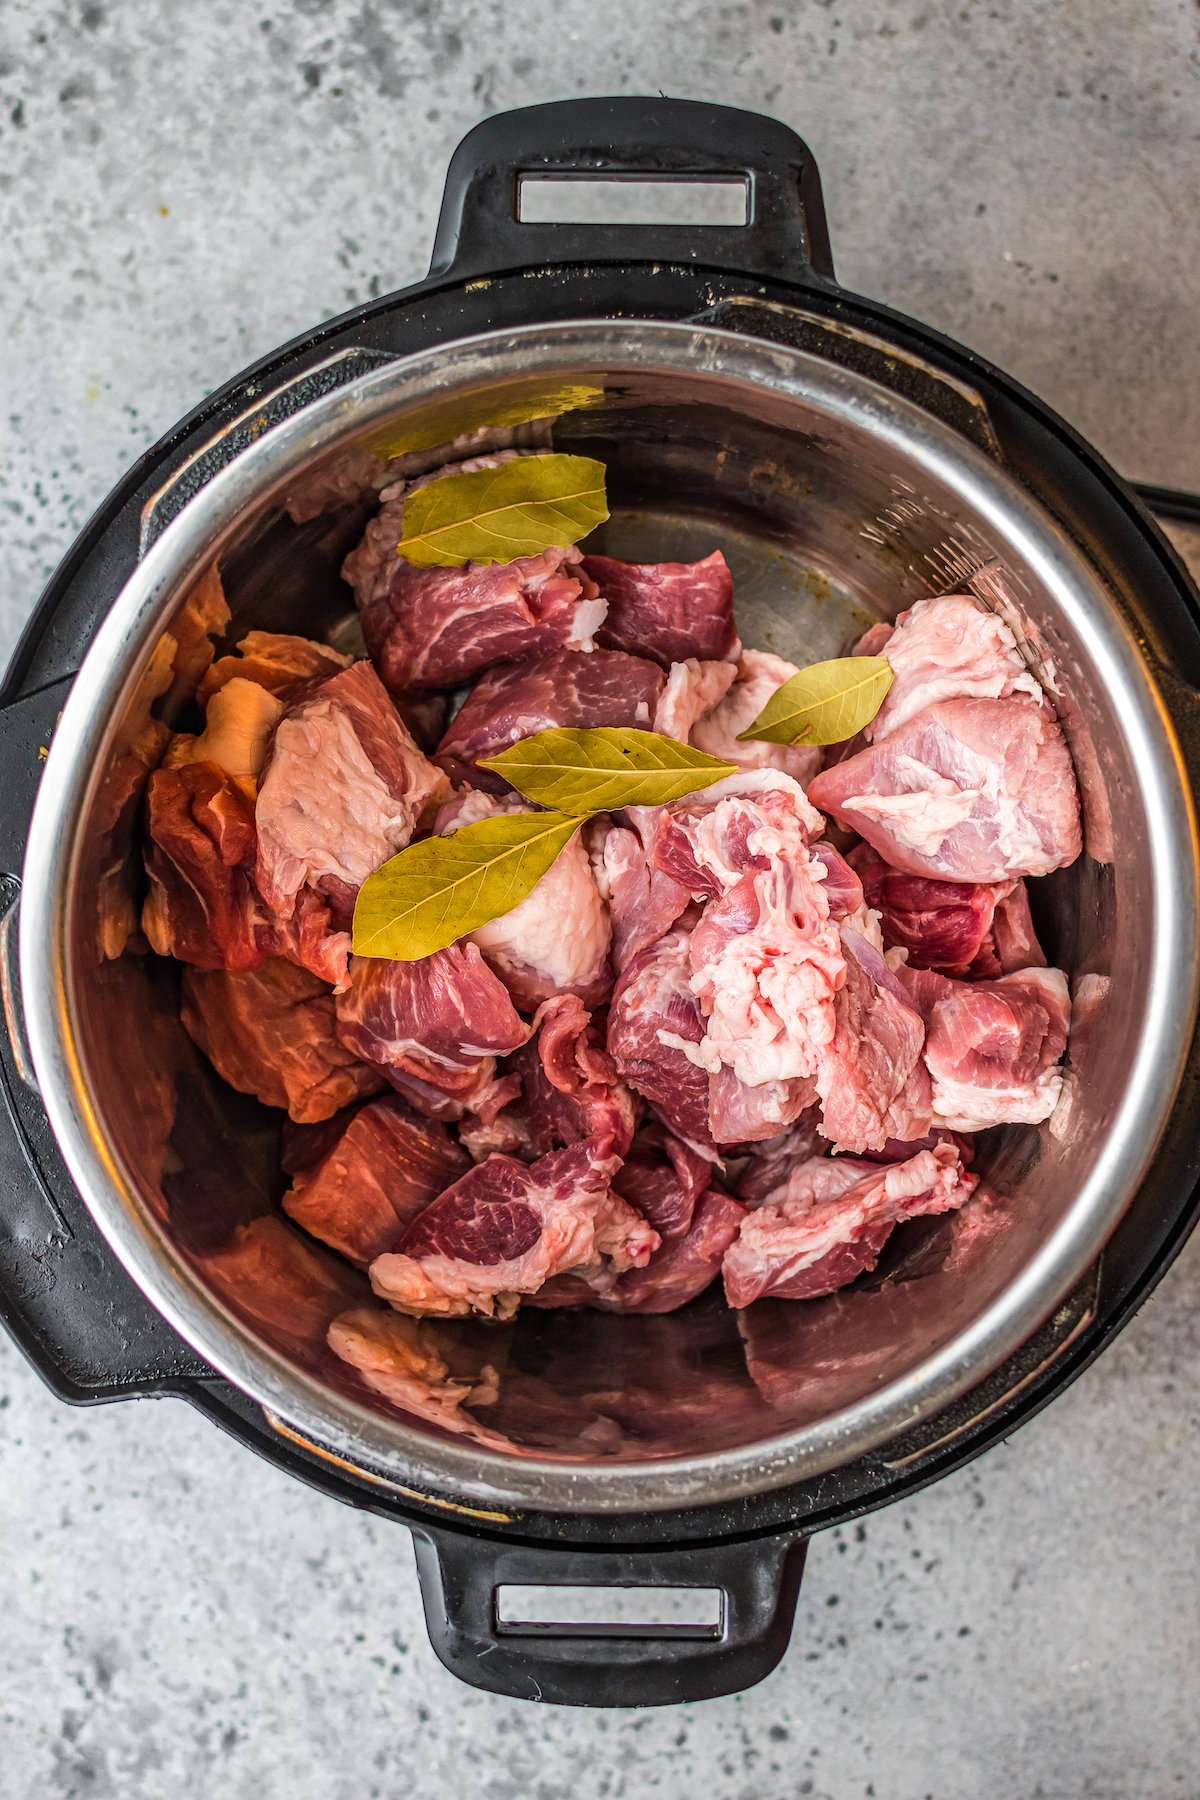 uncooked pork meat and bay leaves in an Instant Pot